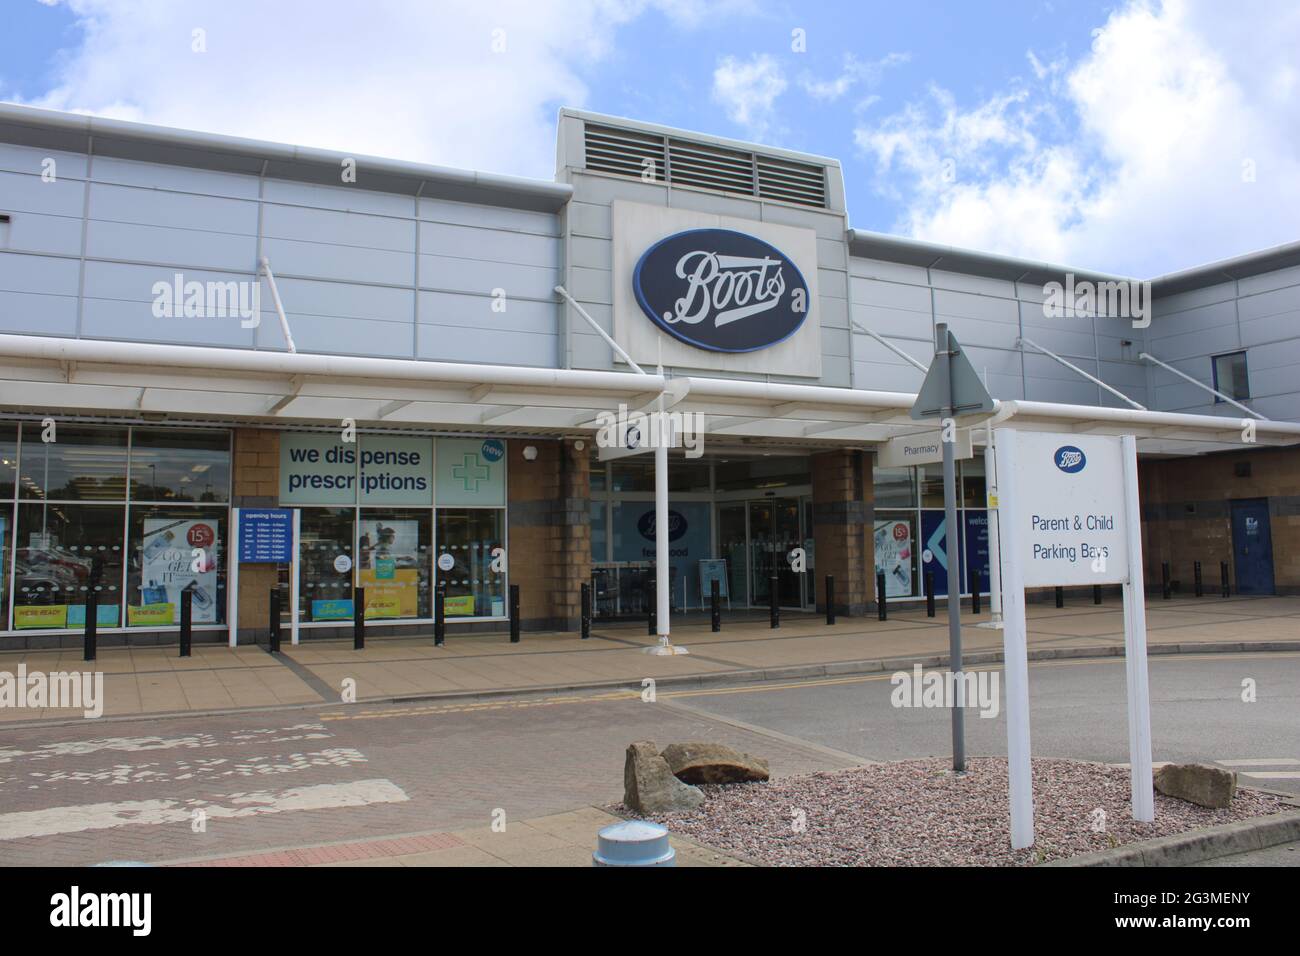 Boots store front with parent and child parking bay sign UK Stock Photo